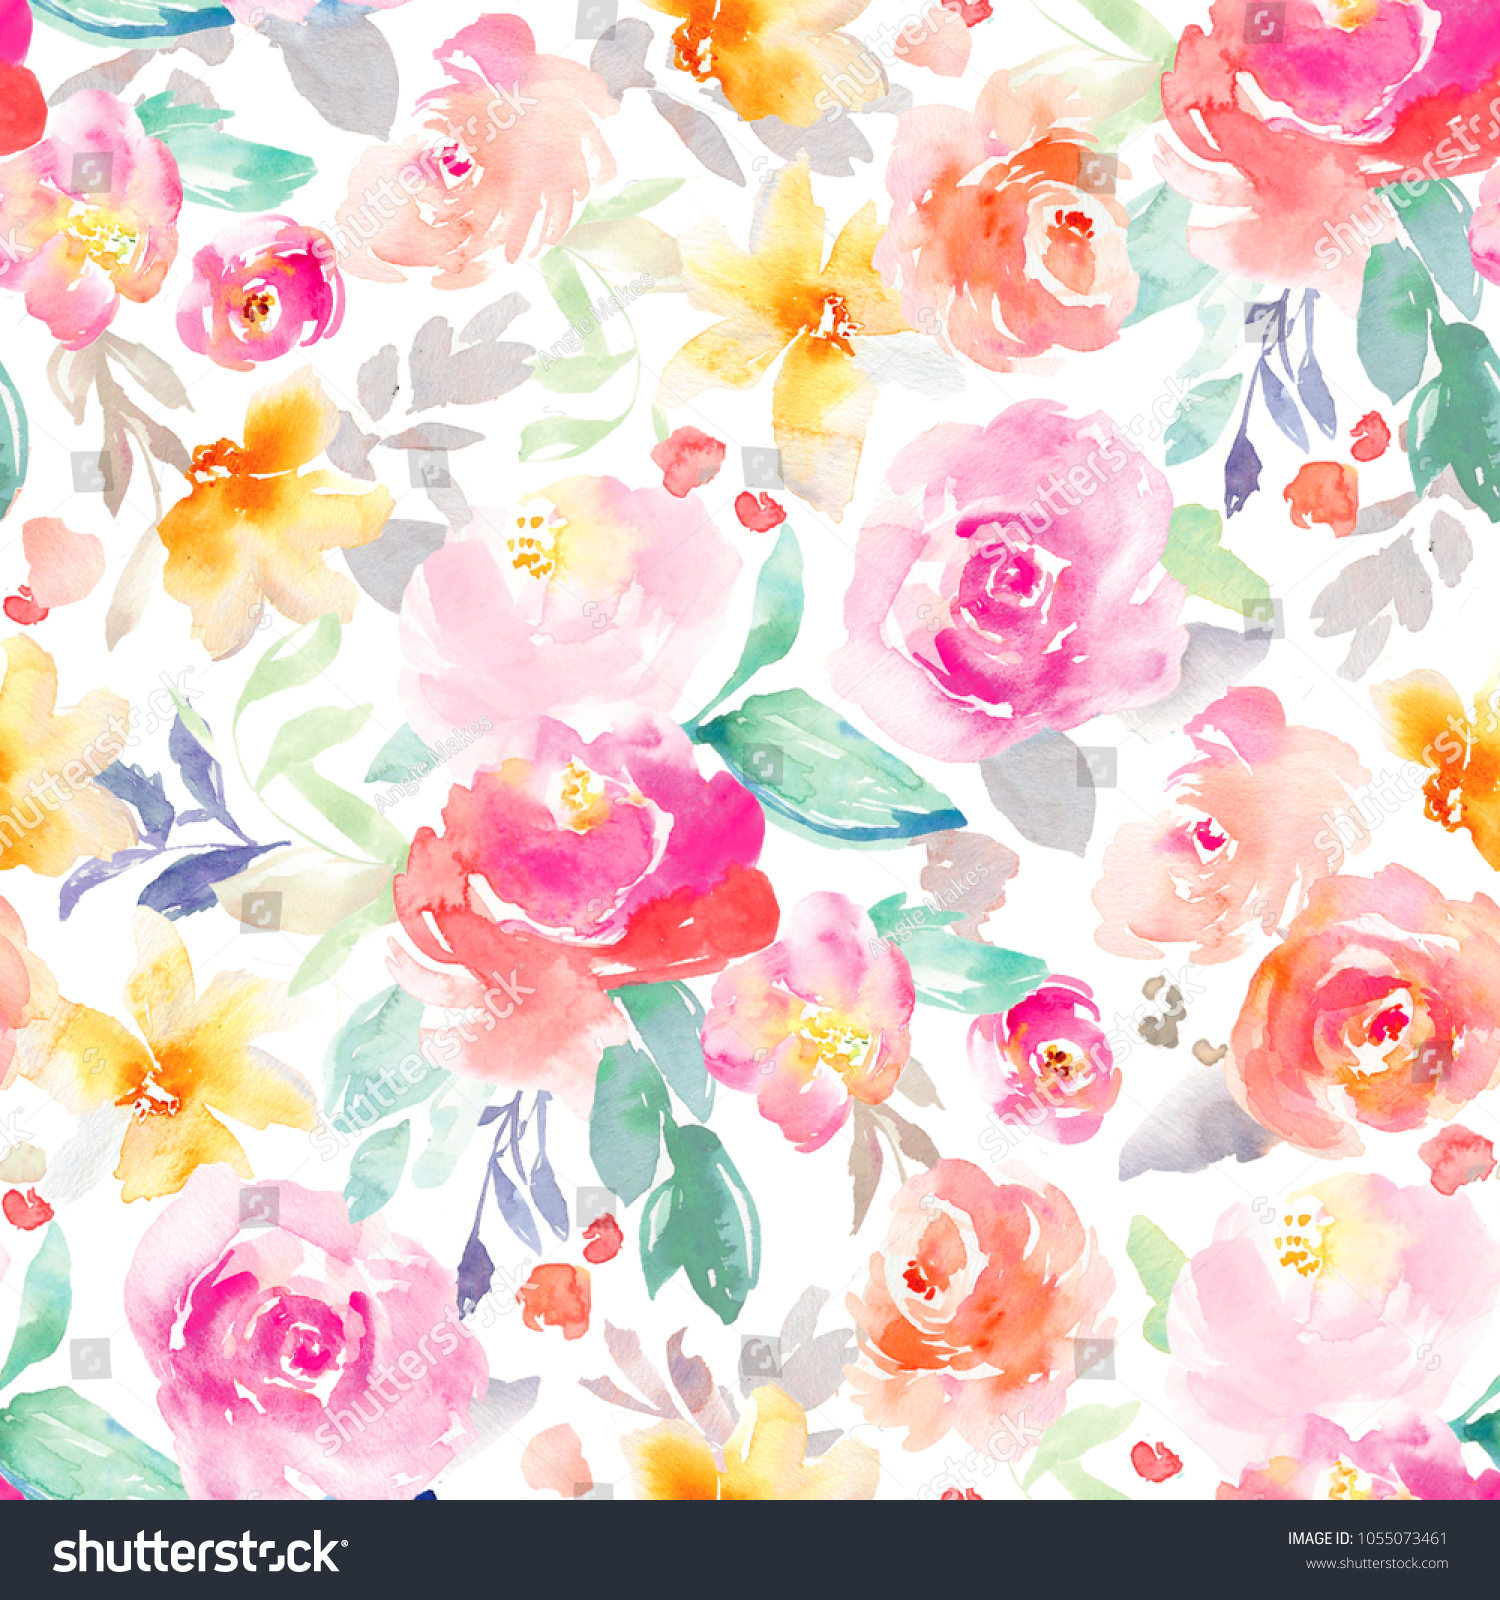 Bright Pink Yellow Girly Watercolor Flowers Stock Illustration 1500x1600